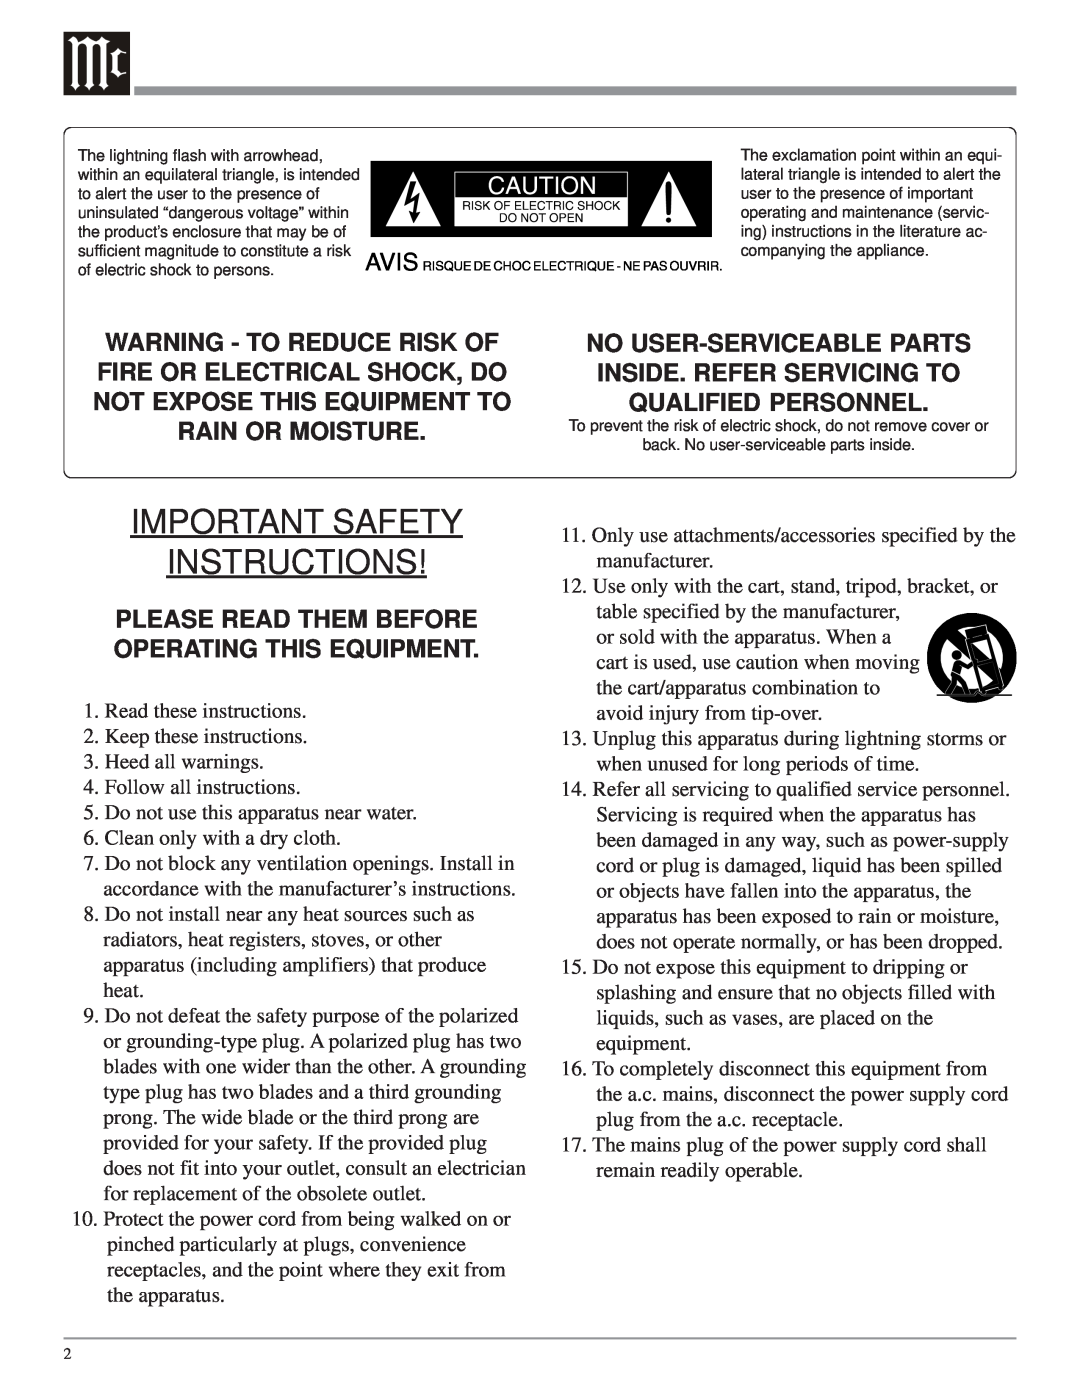 McIntosh MC207 owner manual Important Safety Instructions, Please Read Them Before Operating This Equipment 